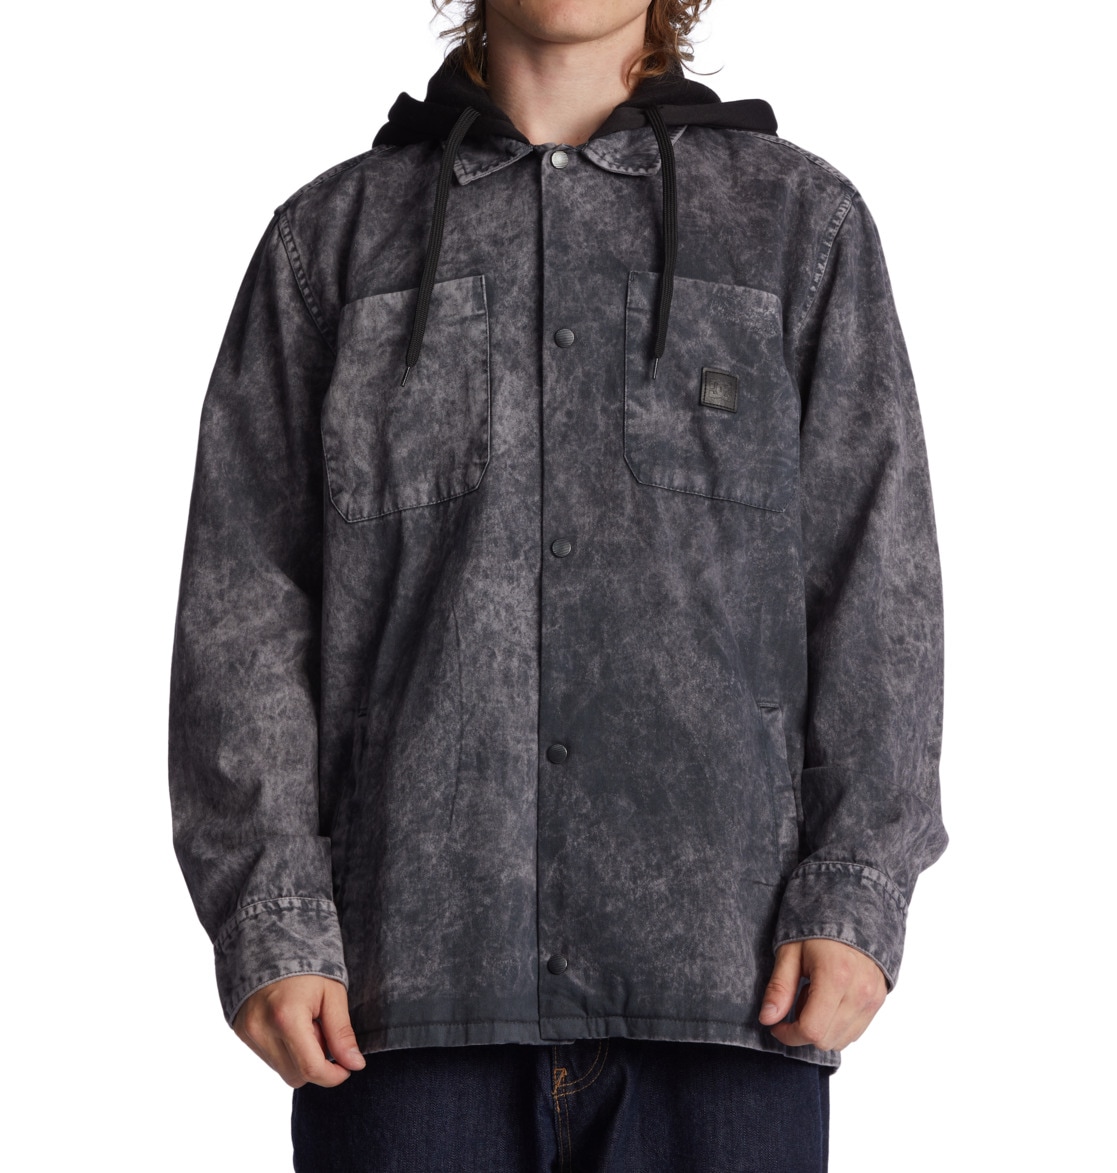 DC Shoes Outdoorjacke »Jester« von DC Shoes